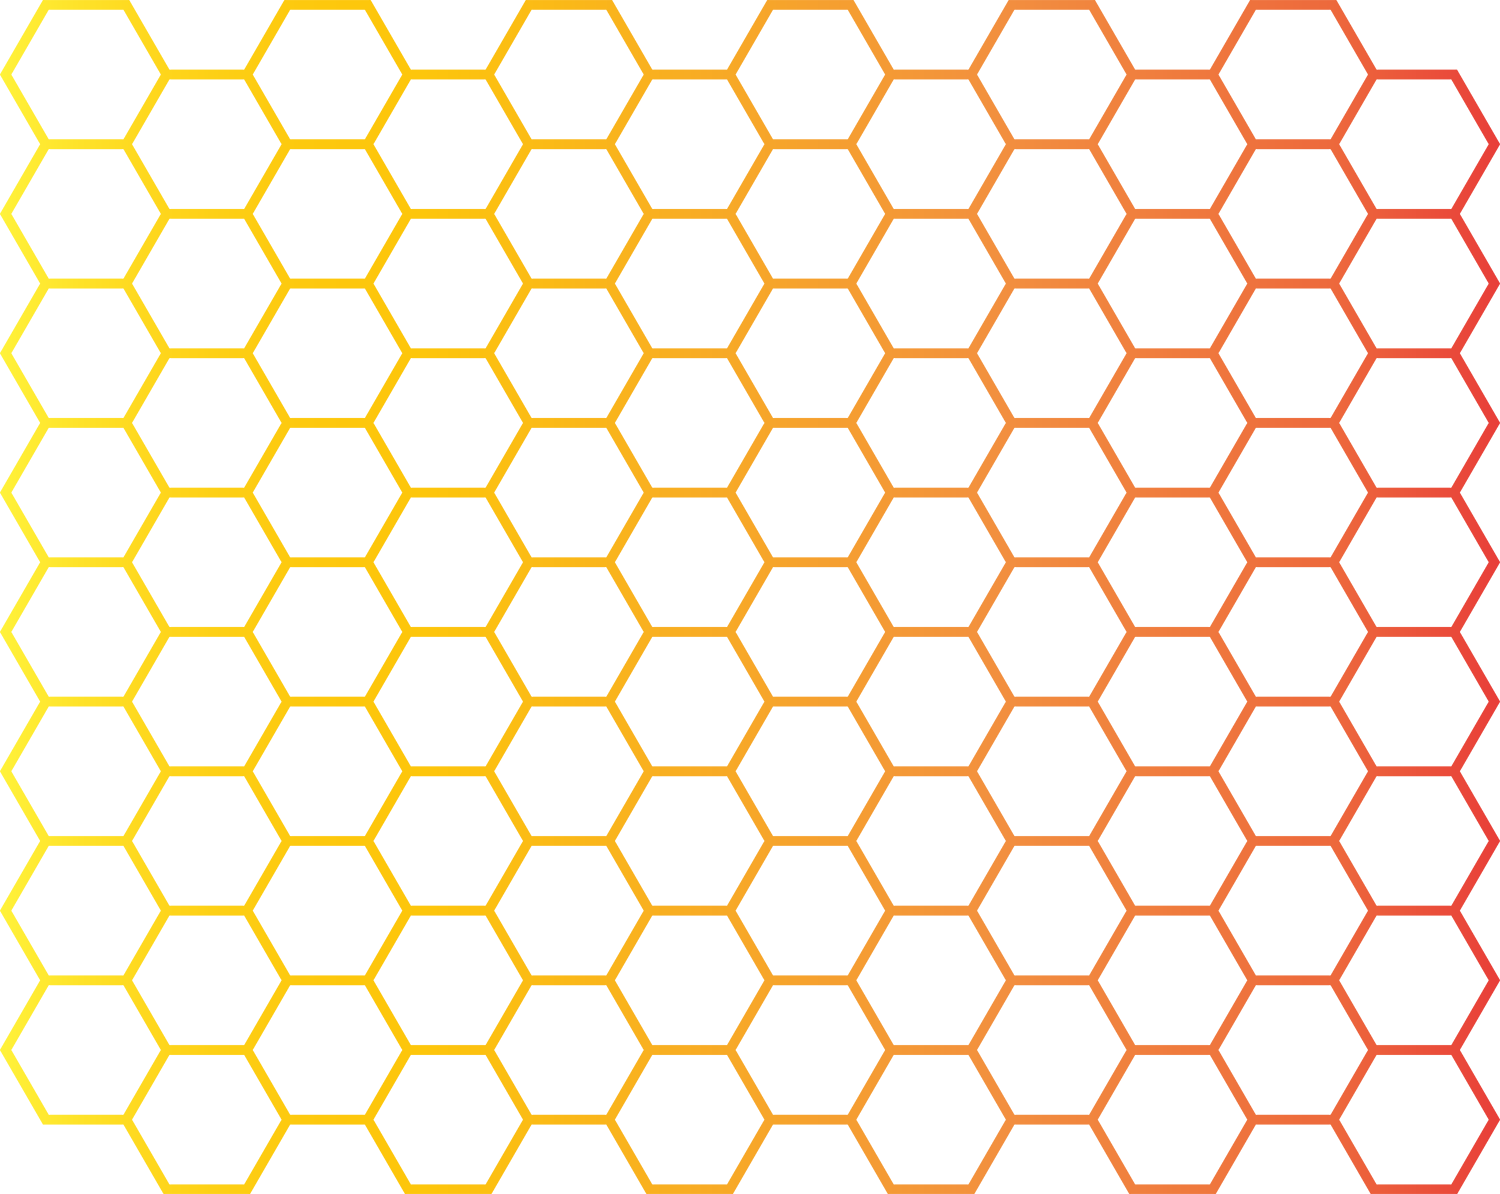 Honeycomb Clipart Pattern and other clipart images on Cliparts pub ™.